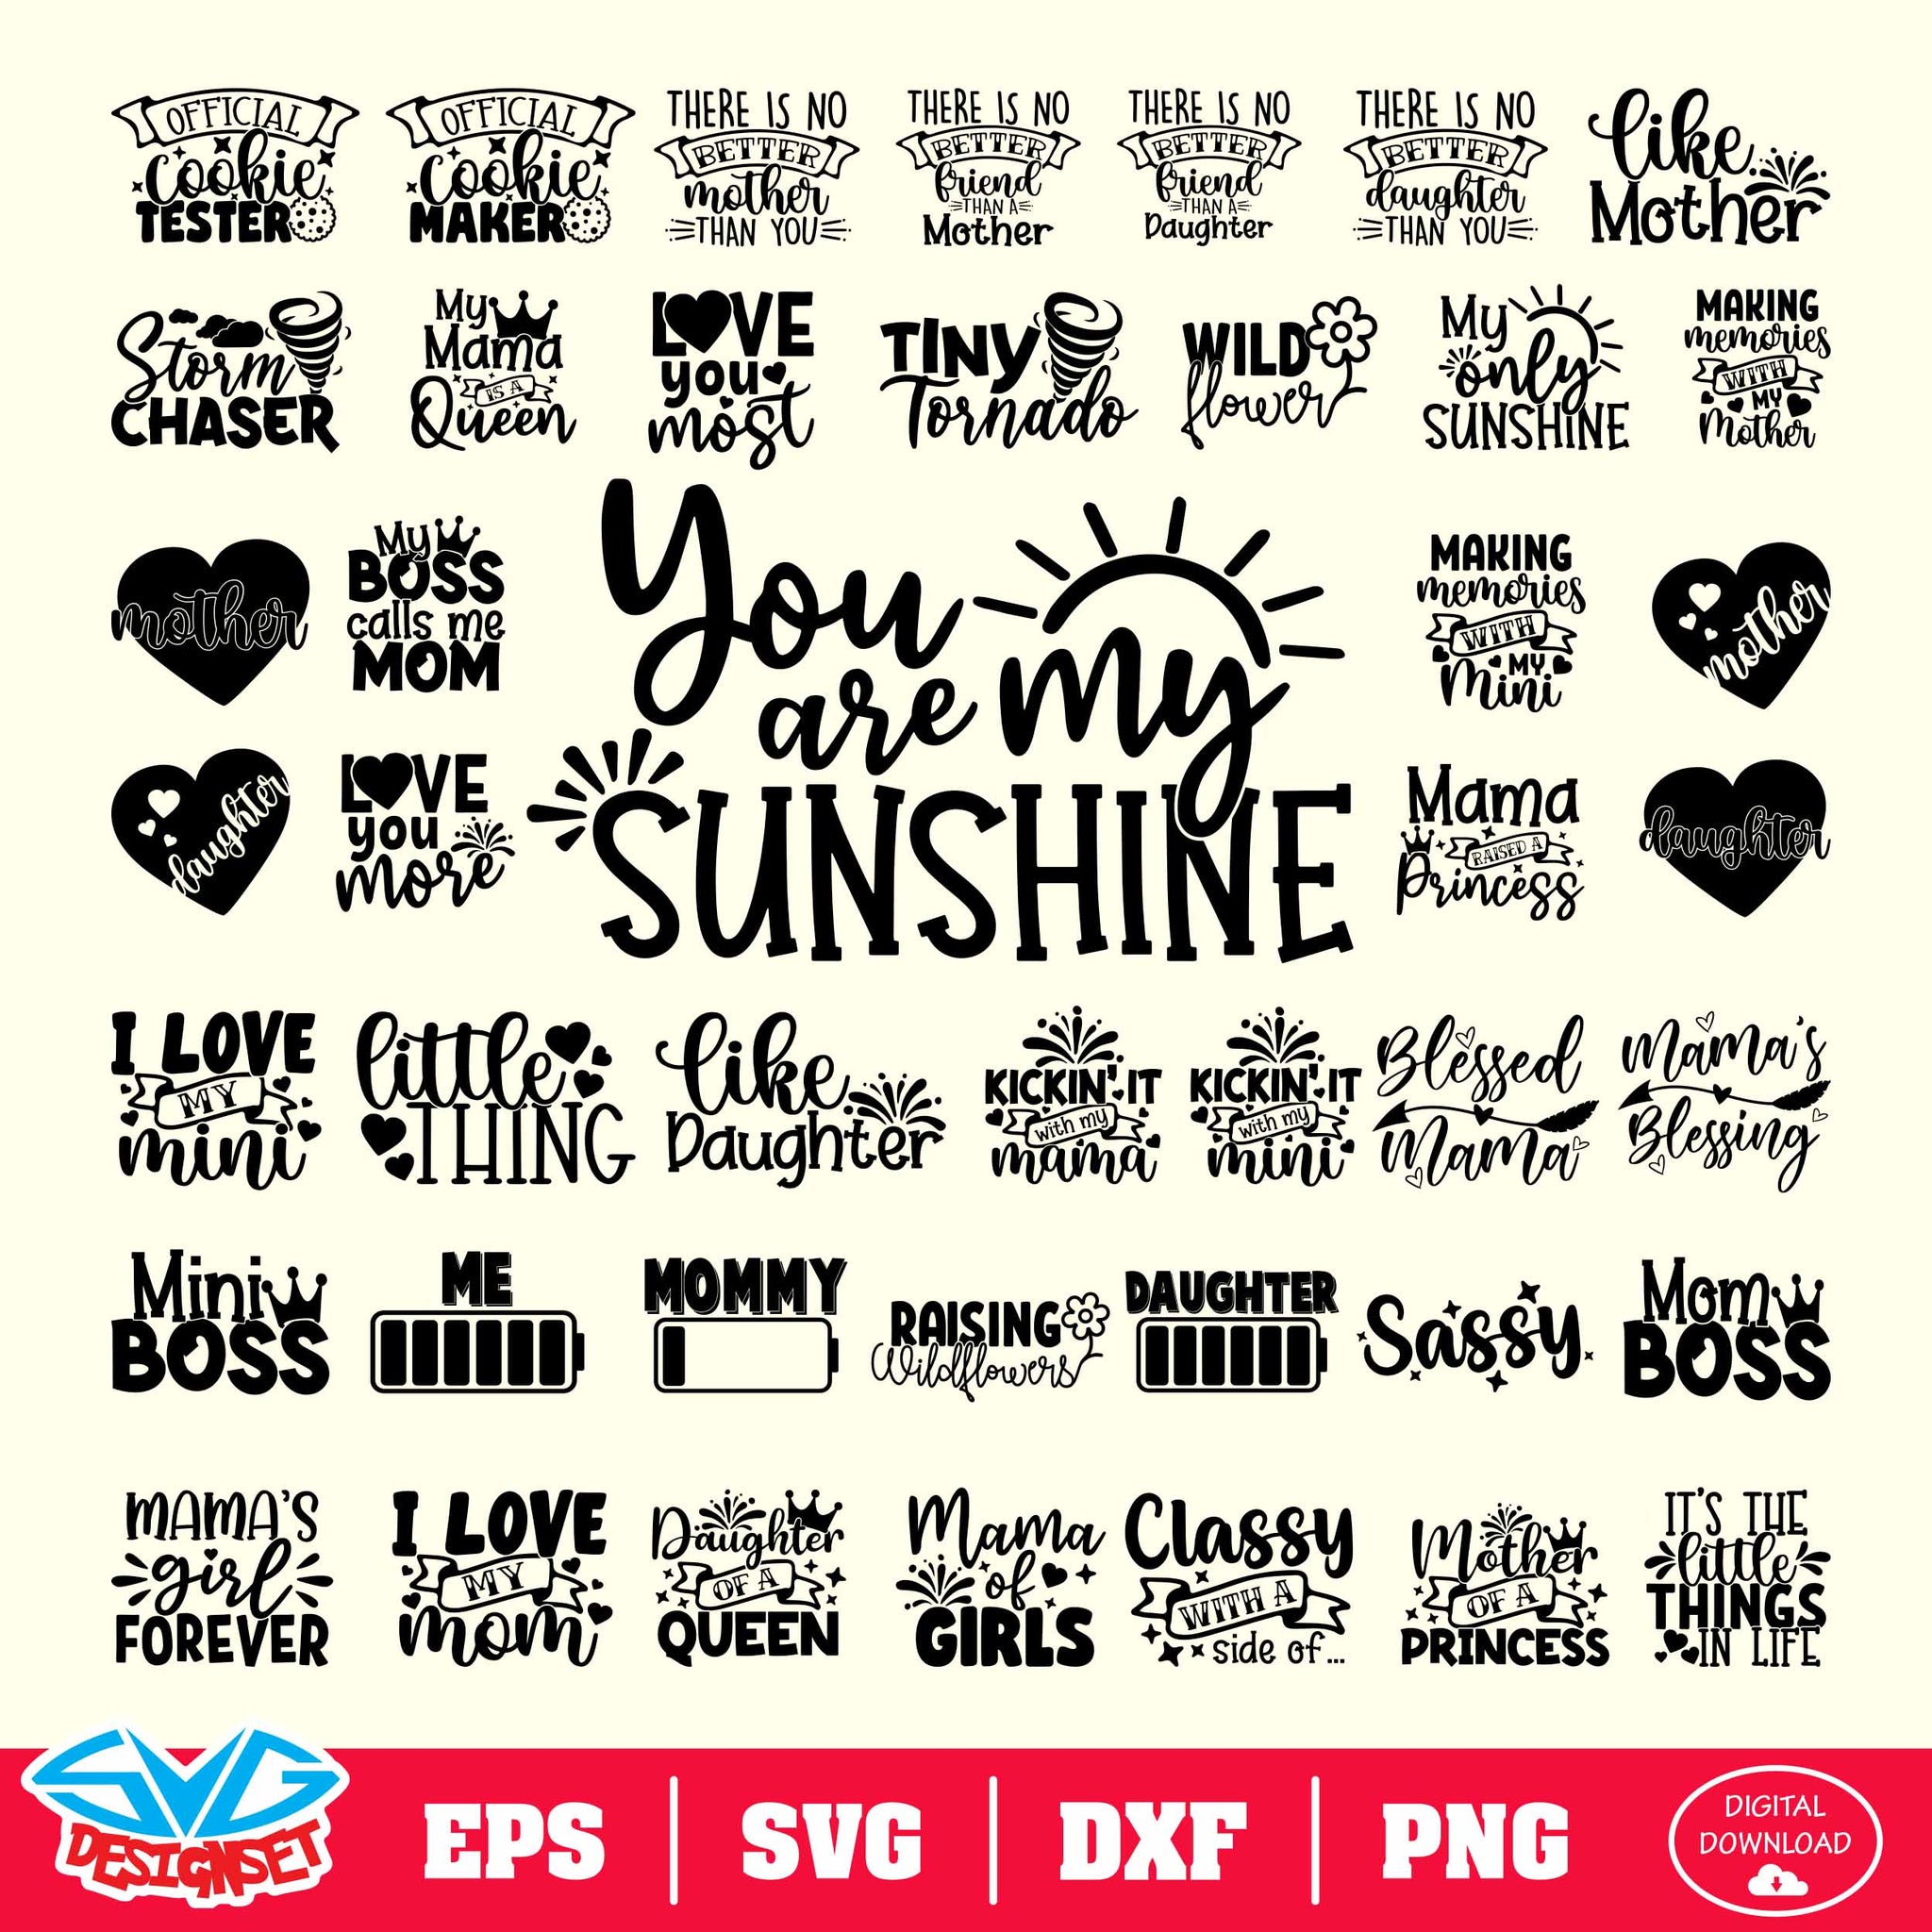 Happy Mother's Day Bundle Svg, Dxf, Eps, Png, Clipart, Silhouette and Cutfiles #2 - SVGDesignSets